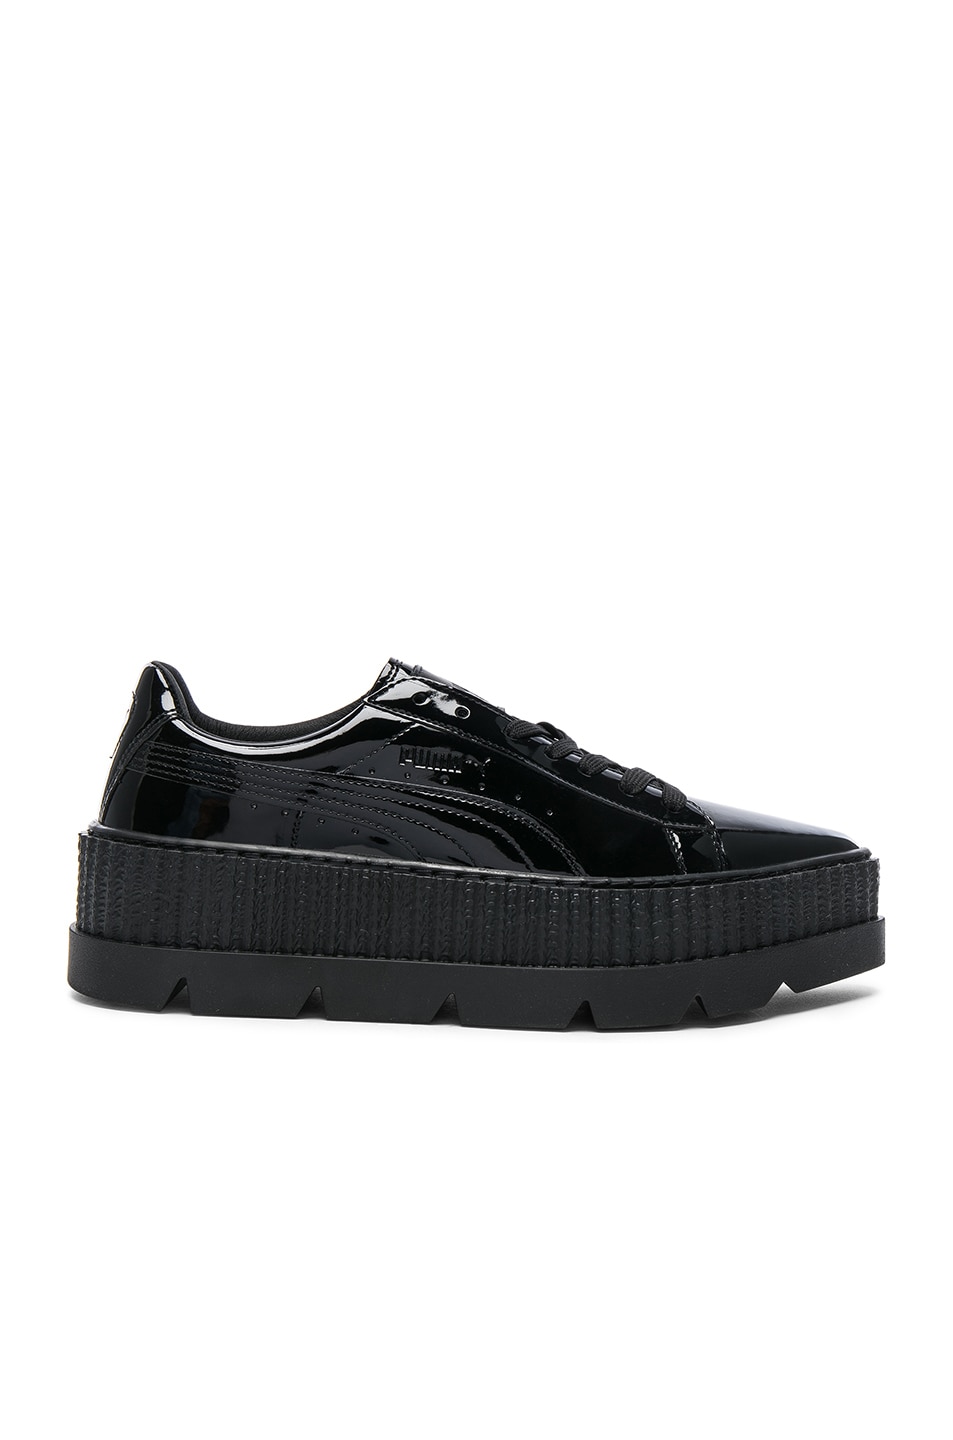 Image 1 of Fenty by Puma Pointy Patent Leather Creeper Sneakers in Puma Black Patent